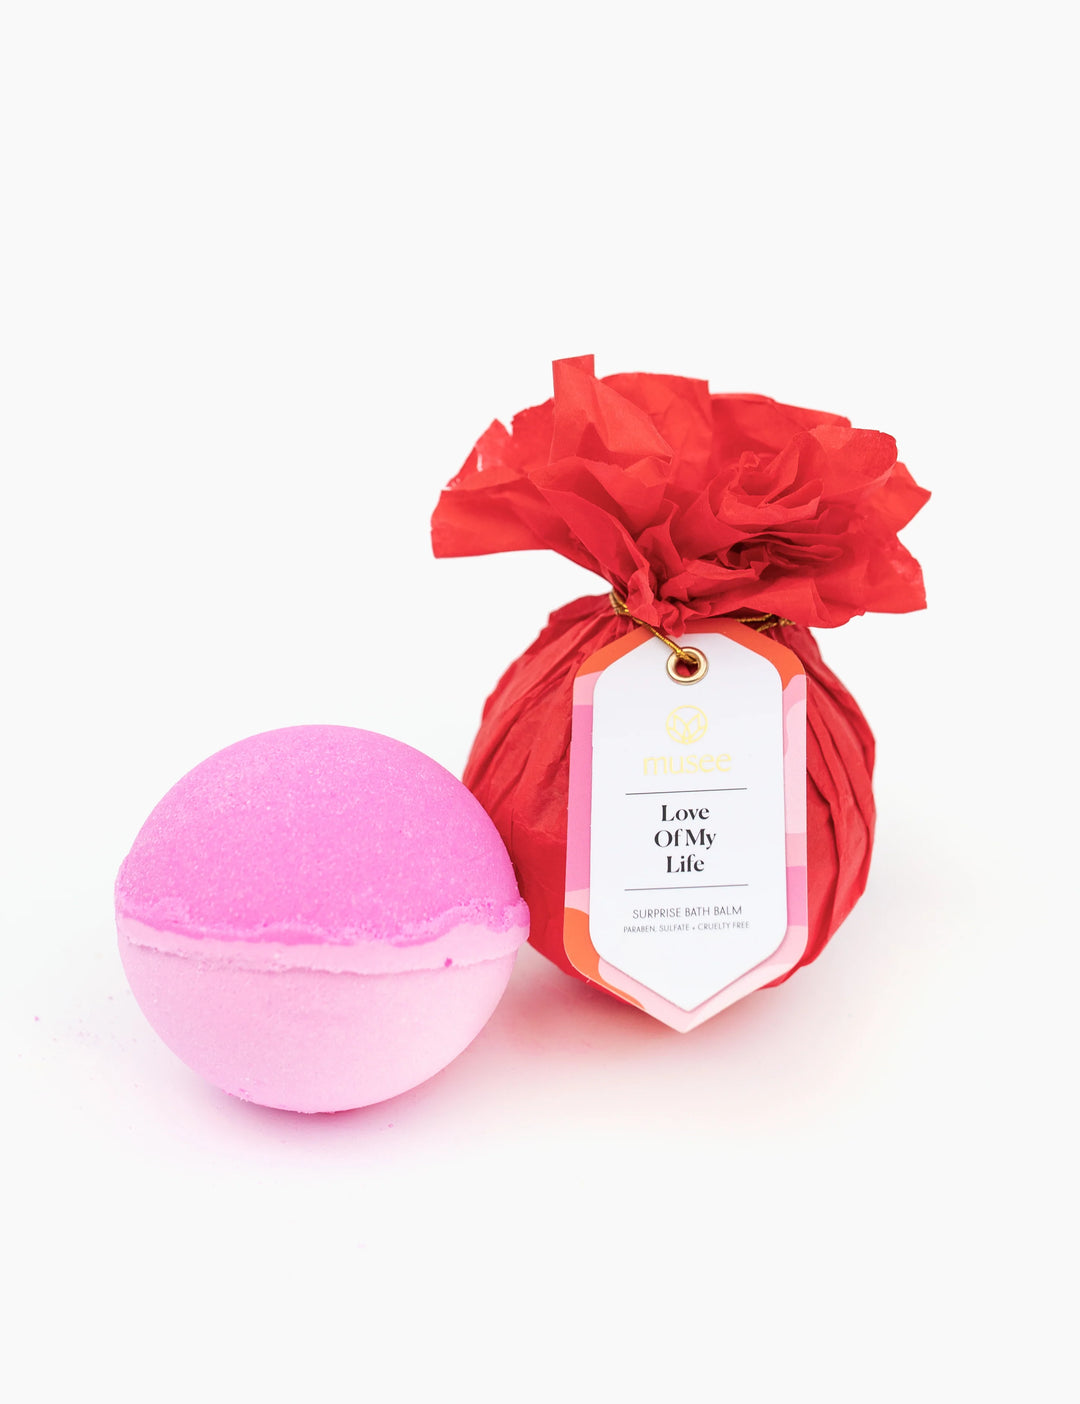 Love Of My Life Bath Balm by Musee - Bloom and Petal